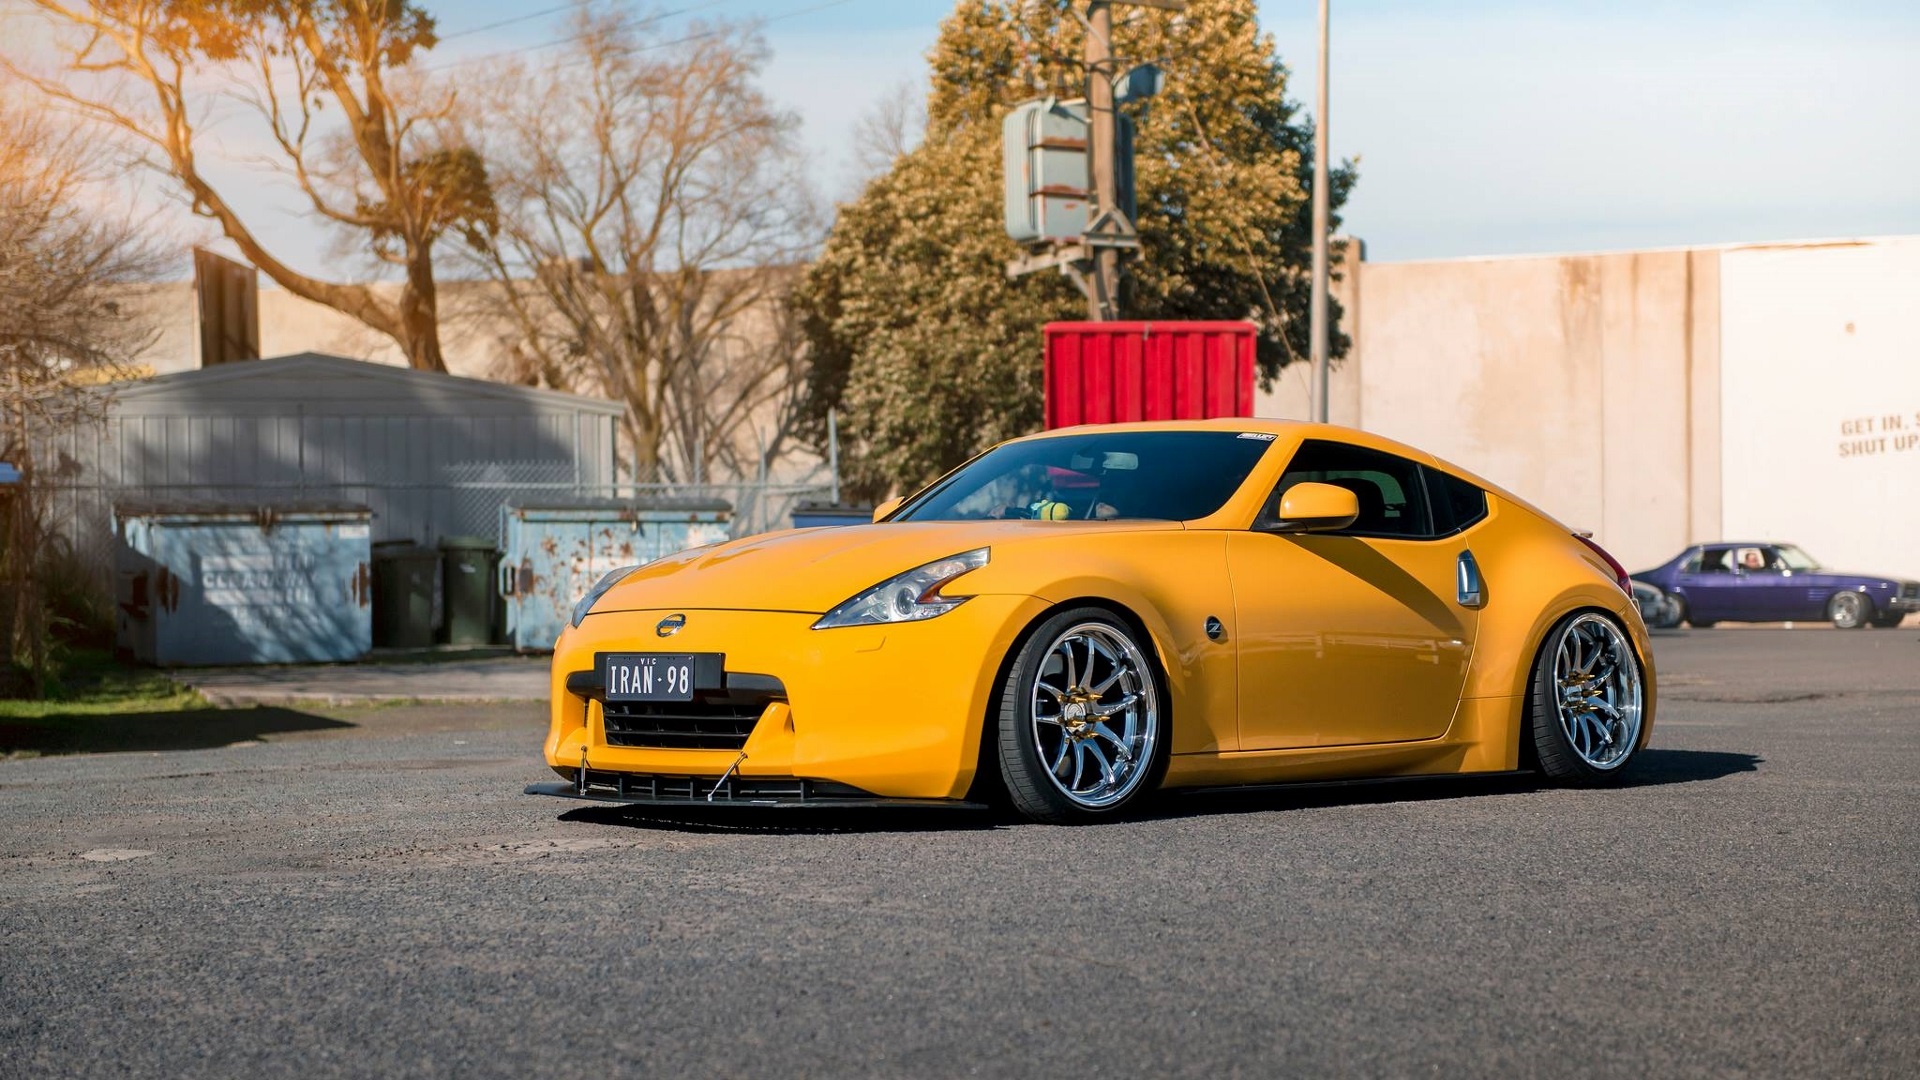 General 1920x1080 Nissan 370Z Nissan Japanese cars yellow cars orange cars sports car car vehicle trees Nissan Fairlady Z frontal view outdoors Nissan 350Z